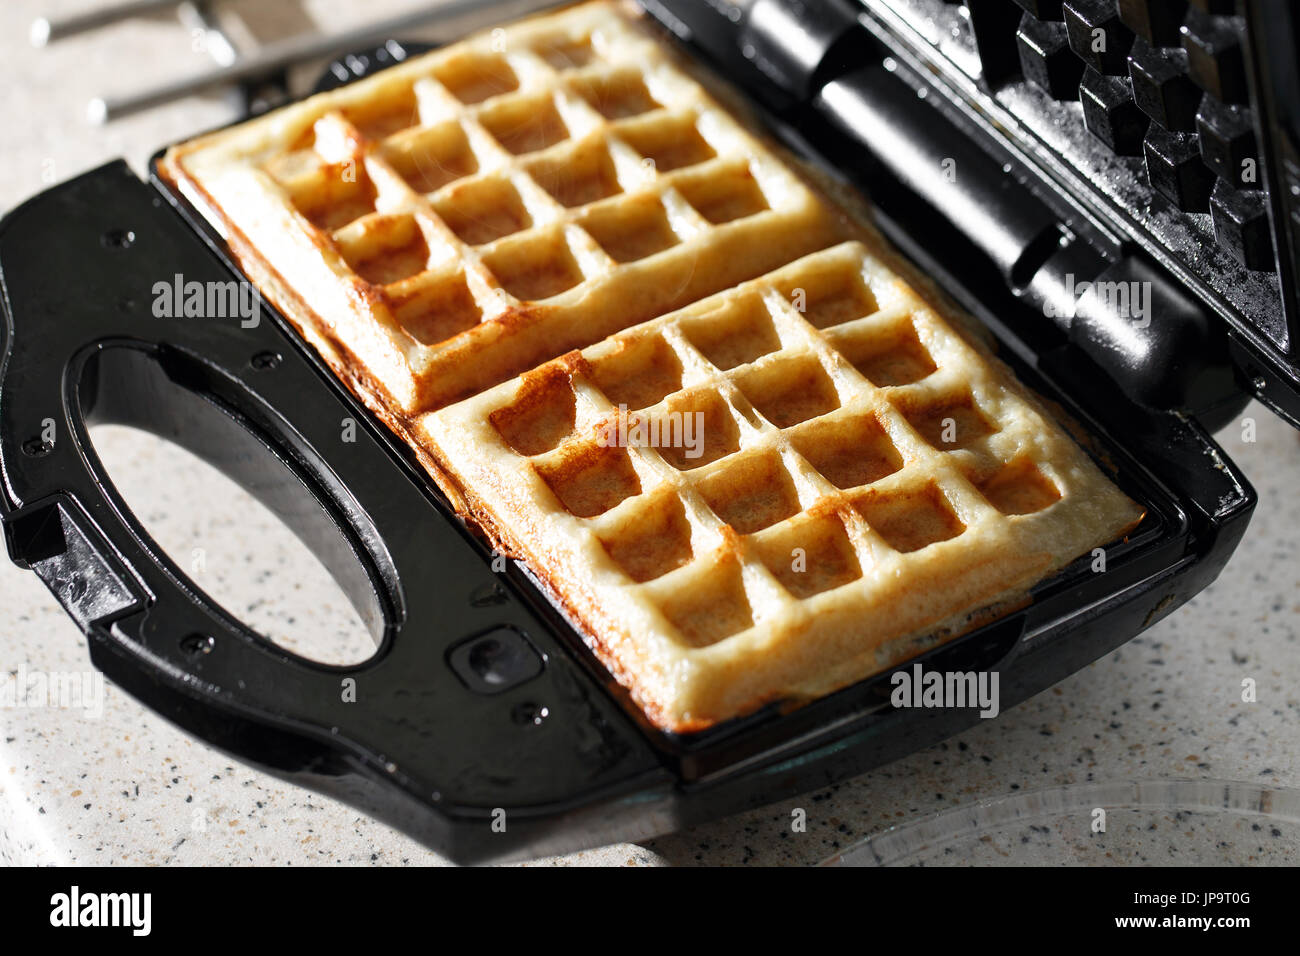 hash browns made in waffle maker kitchen hack Stock Photo - Alamy